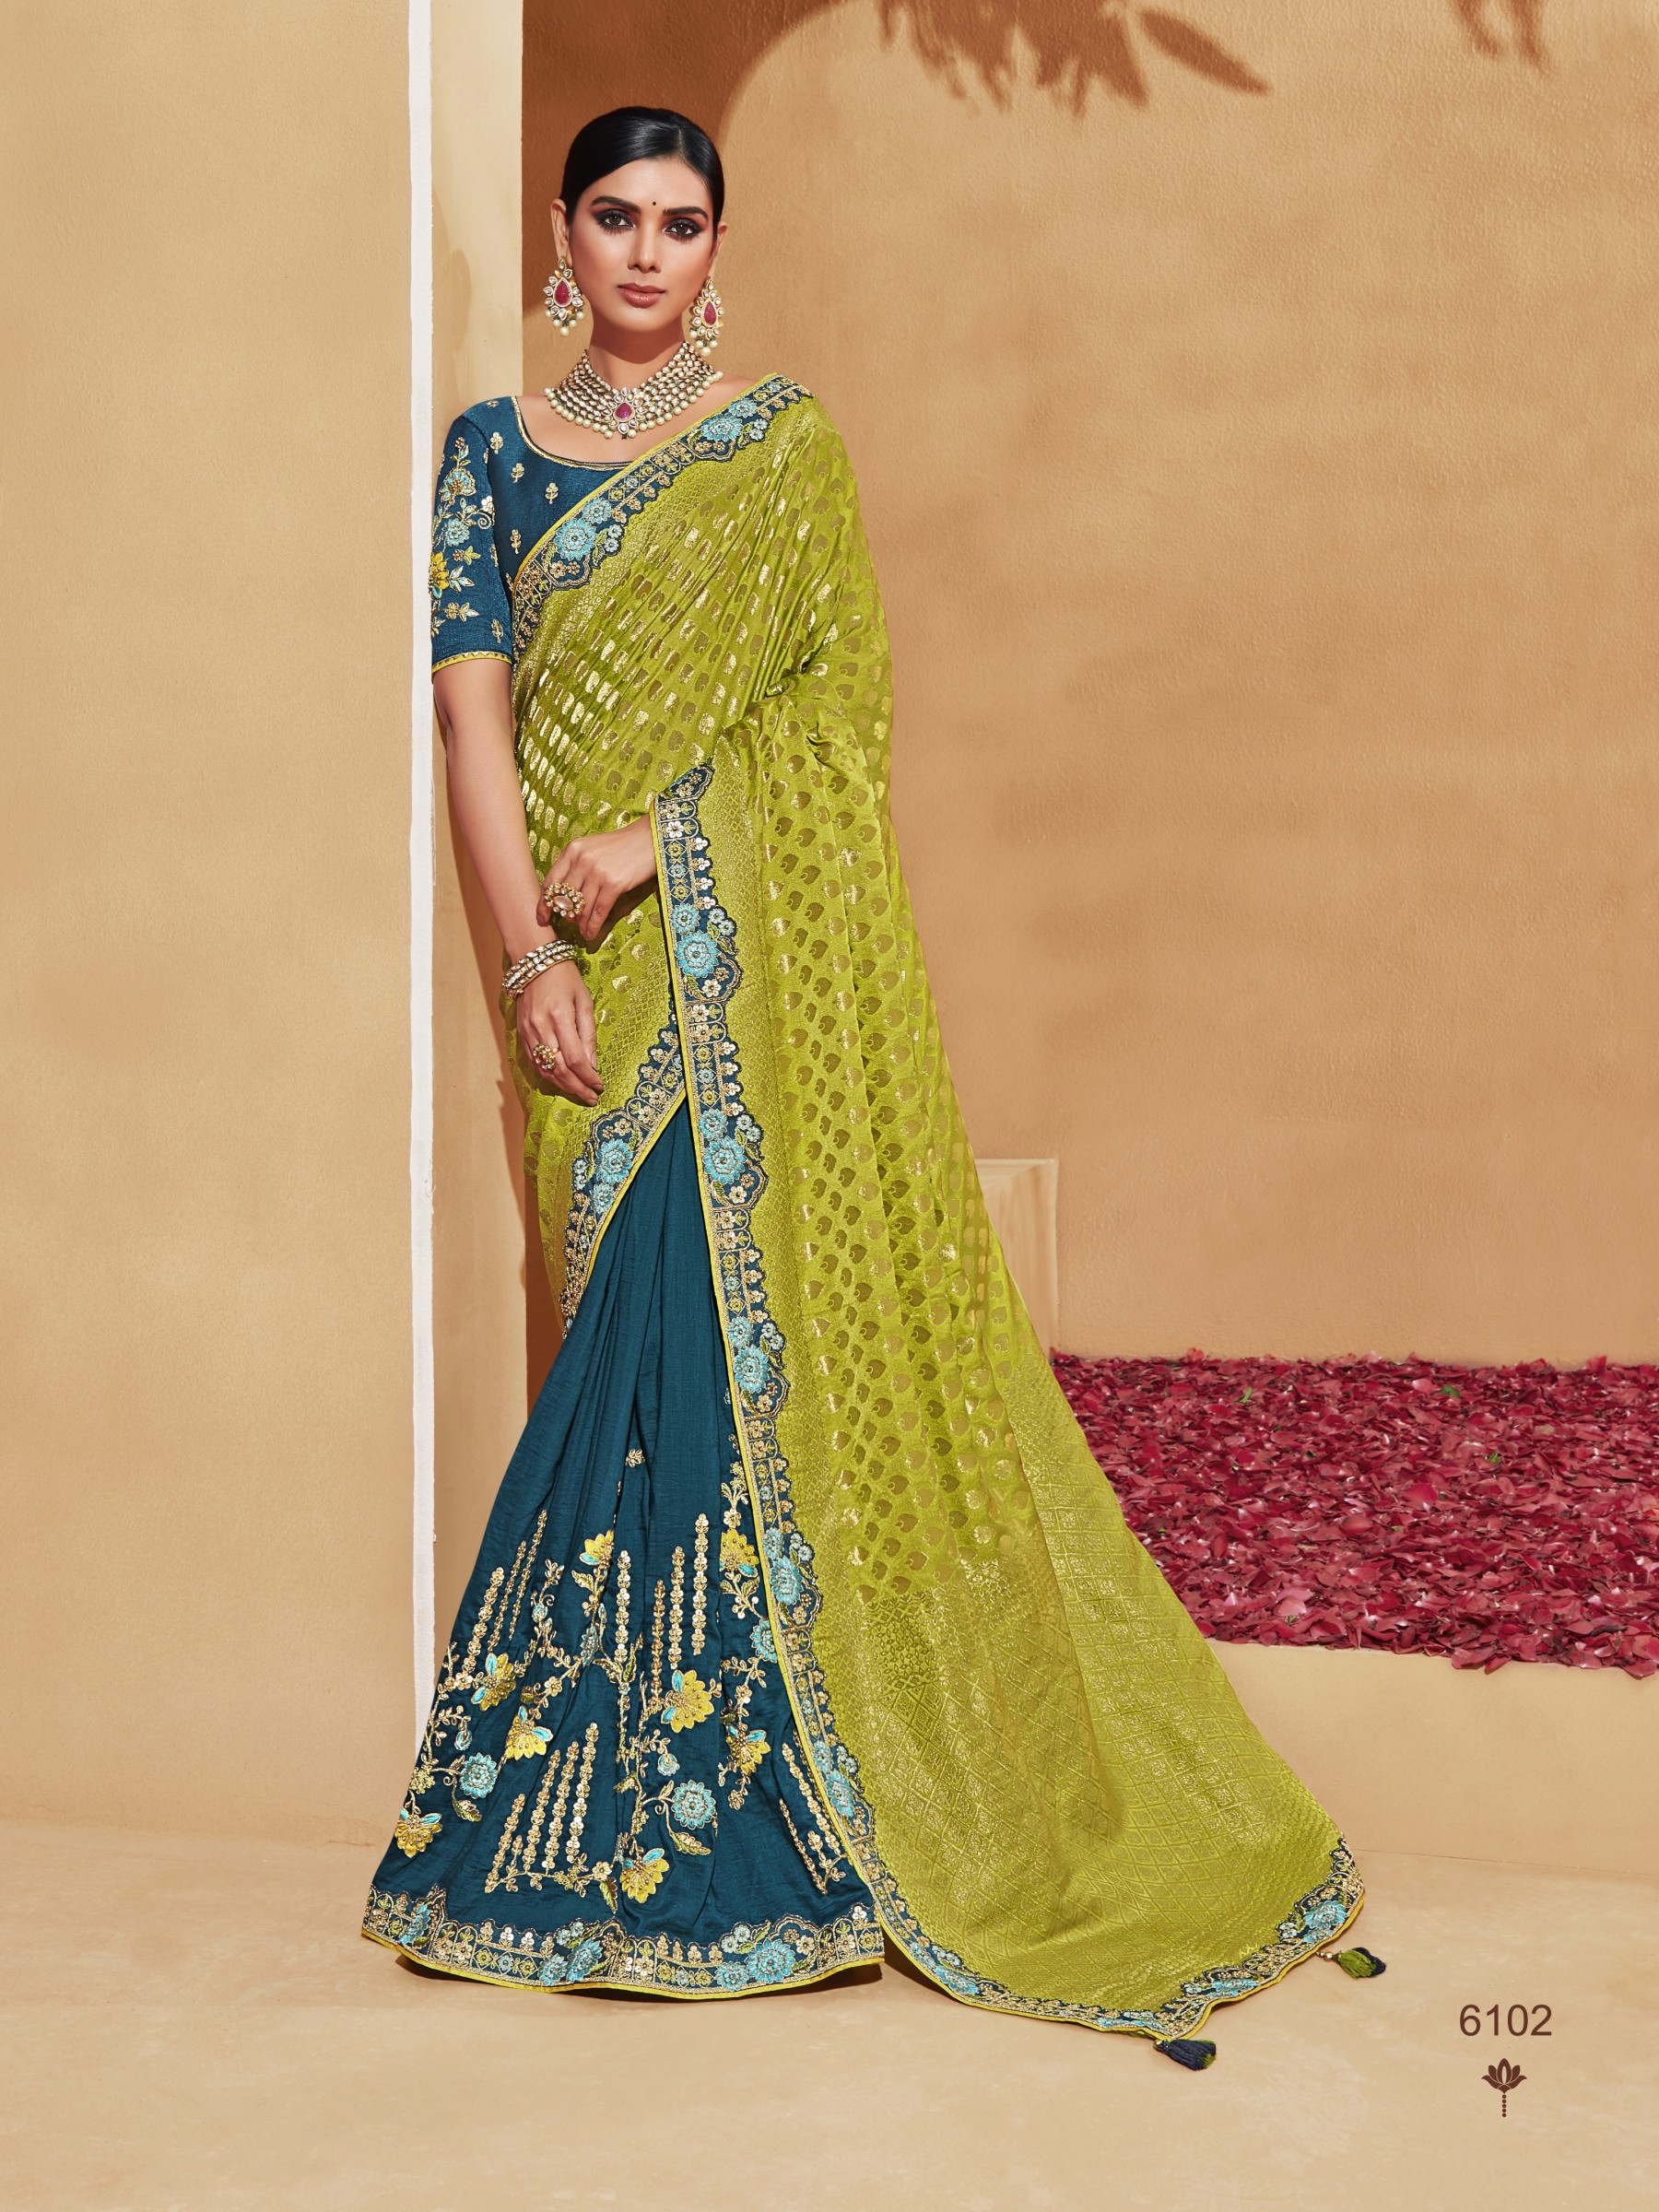  Banarsi silk  Saree Teal Blue & Green Color With Embroidery Work